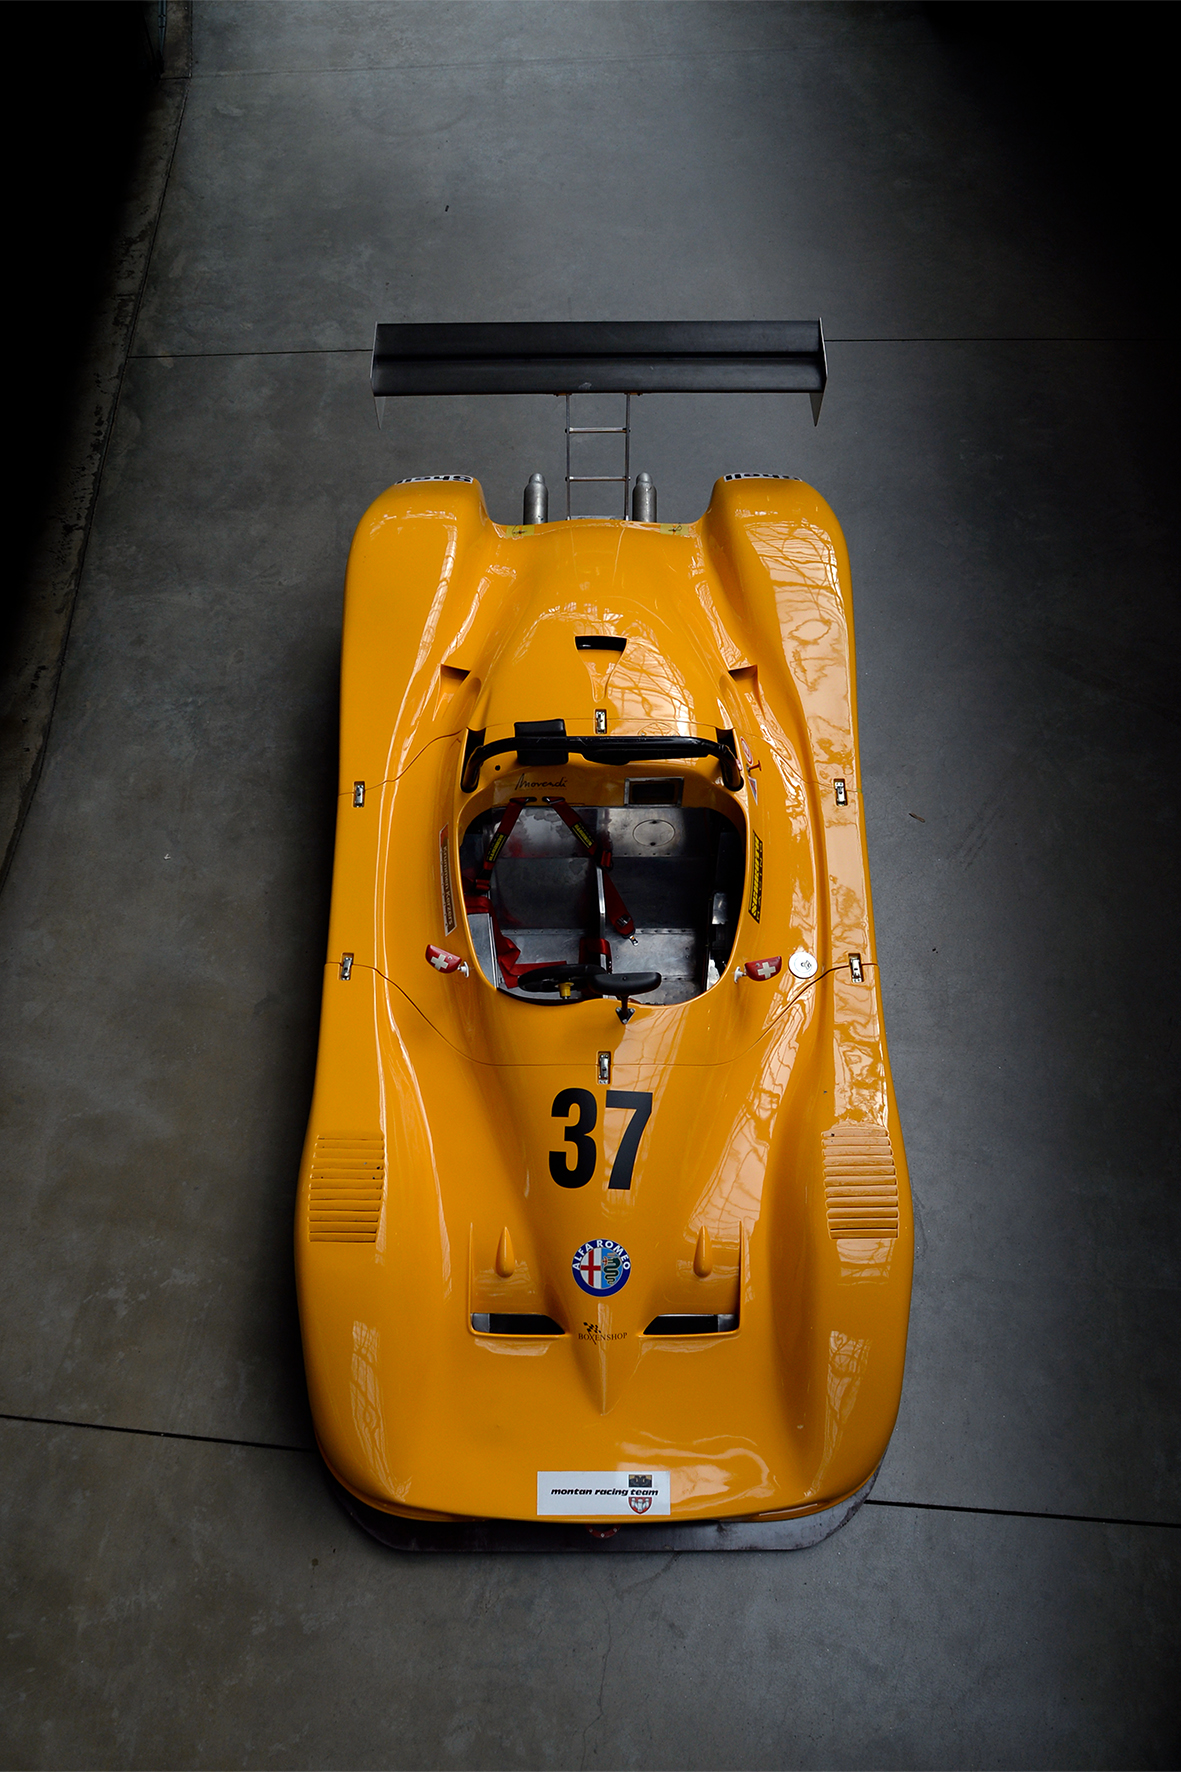 Argo JM21 - A Very Rare And Mostly Unknown Race Car